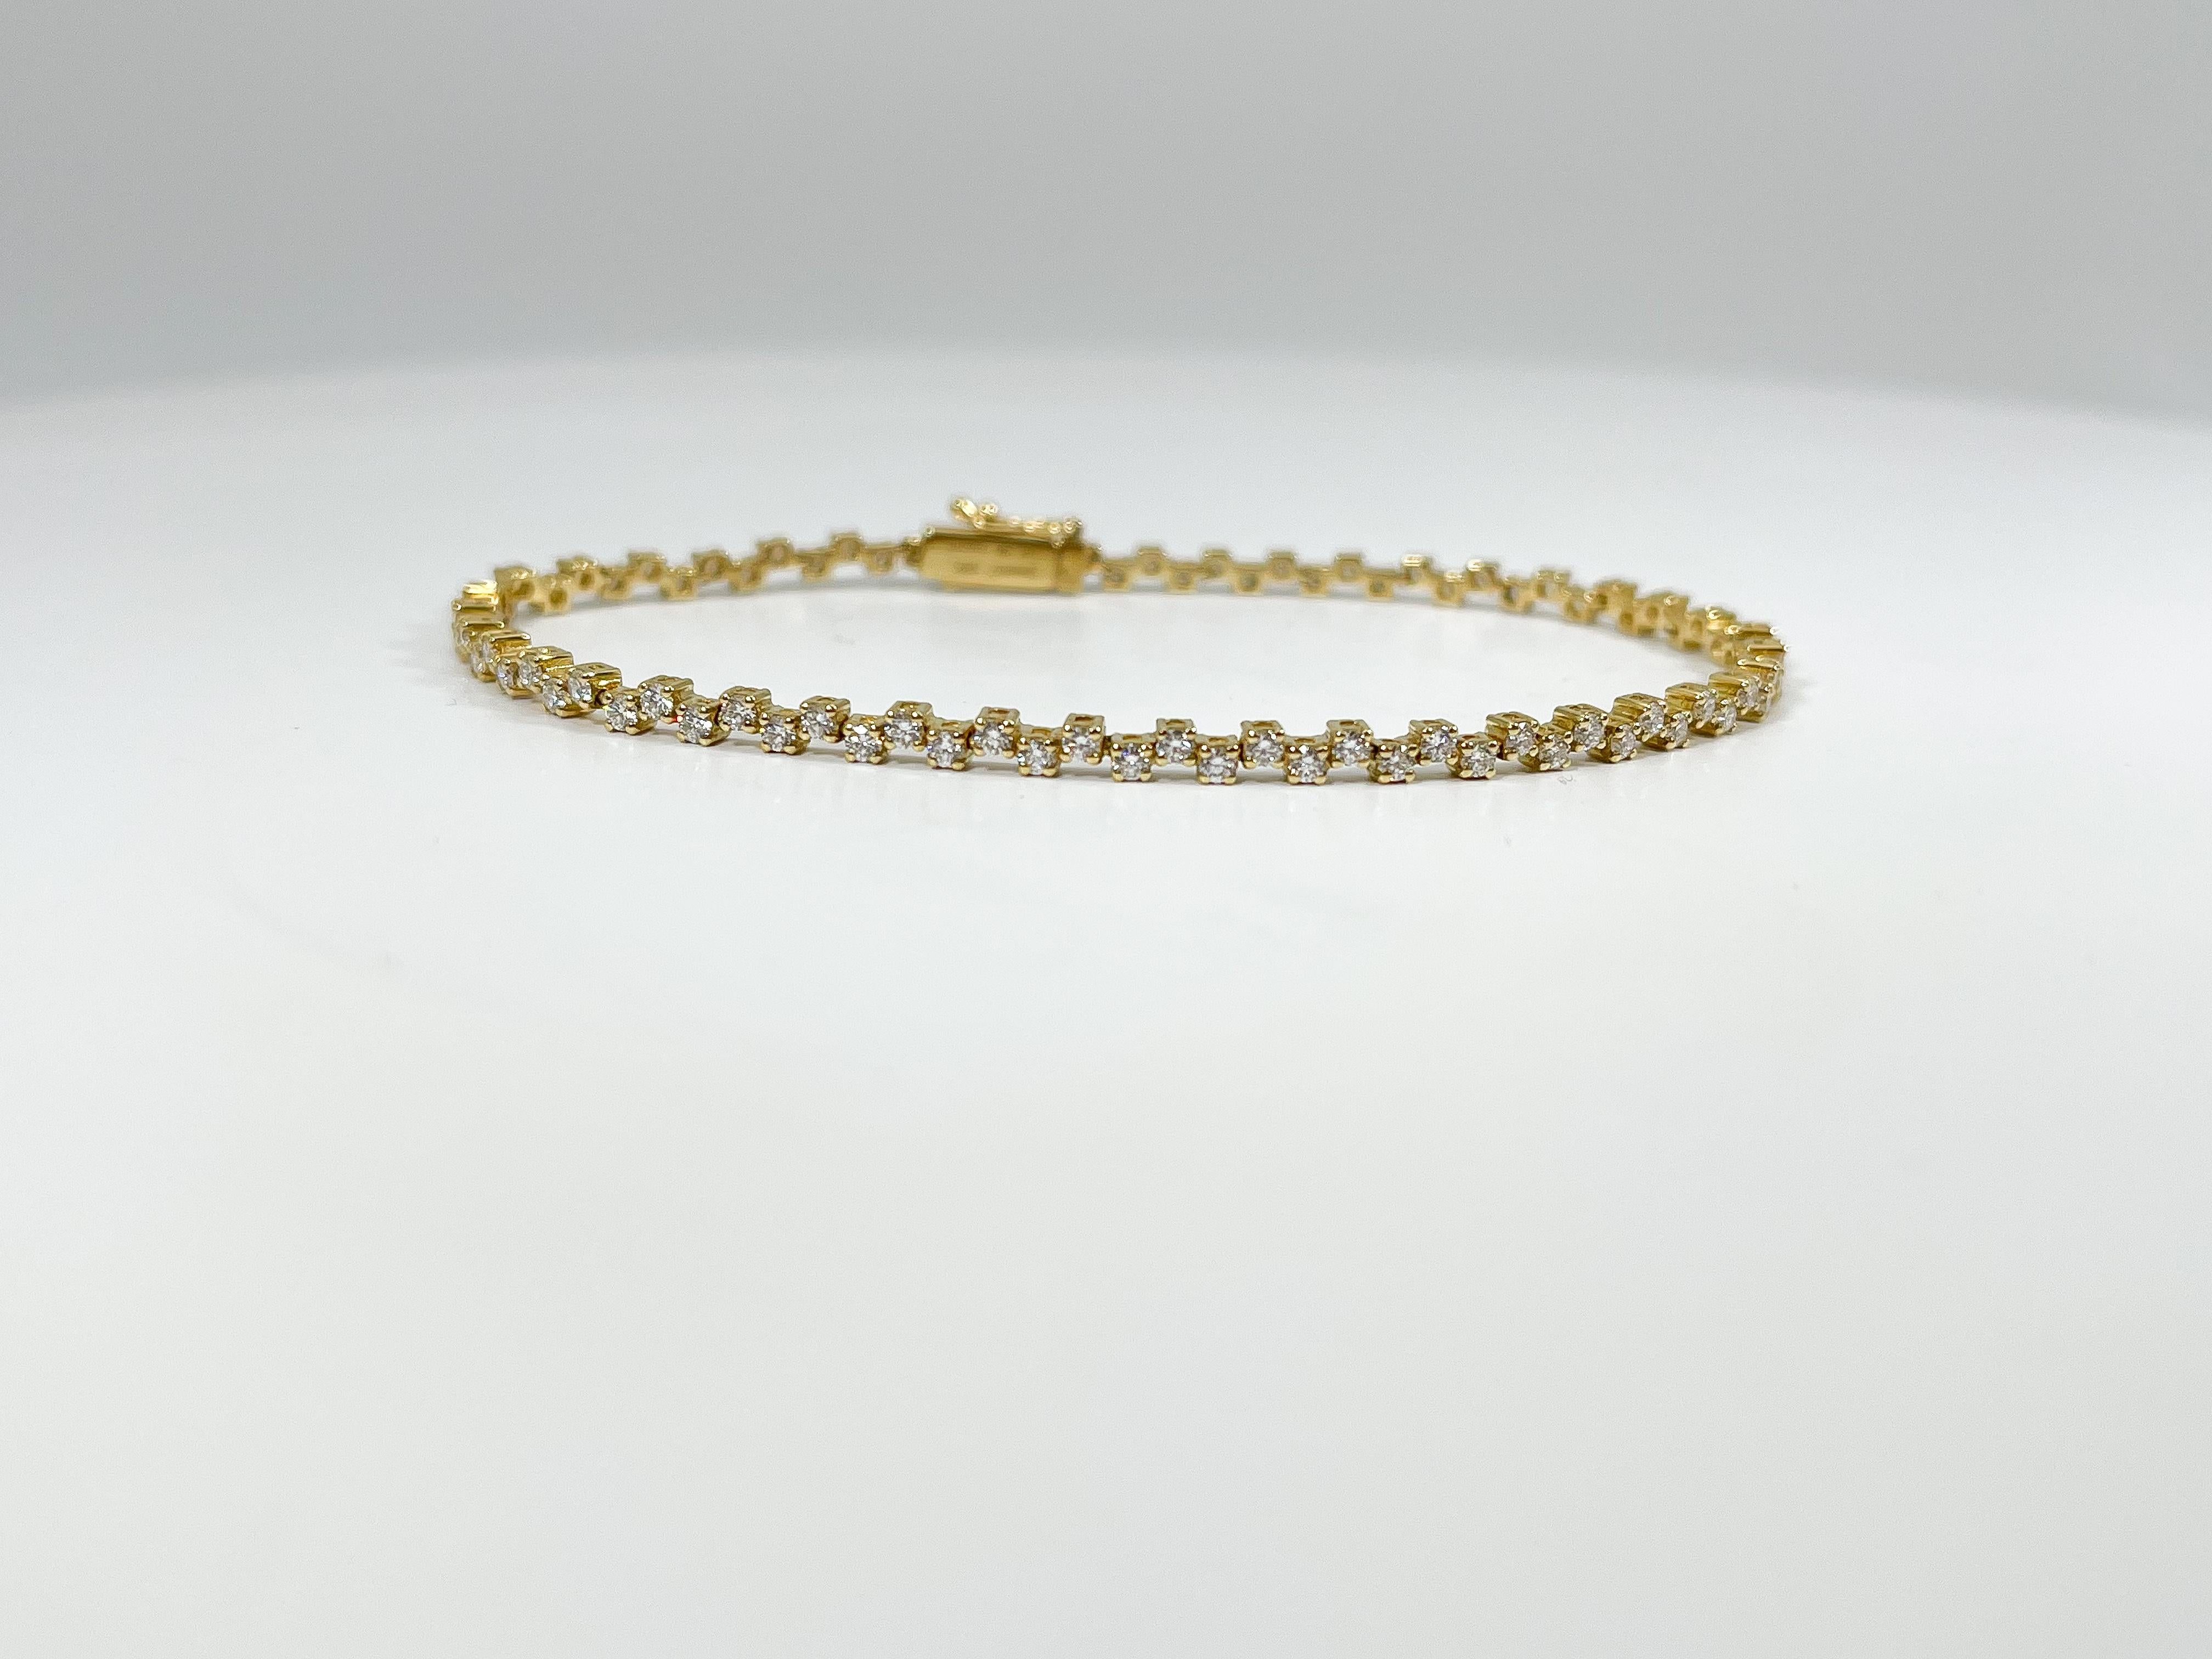 Simon G 18k yellow gold 1.90 CTW diamond tennis bracelet. The diamonds in this bracelet are all round, the width is 2 mm, length is 7 inches, and it has a total weight of 7.2.
Part number- LB2327